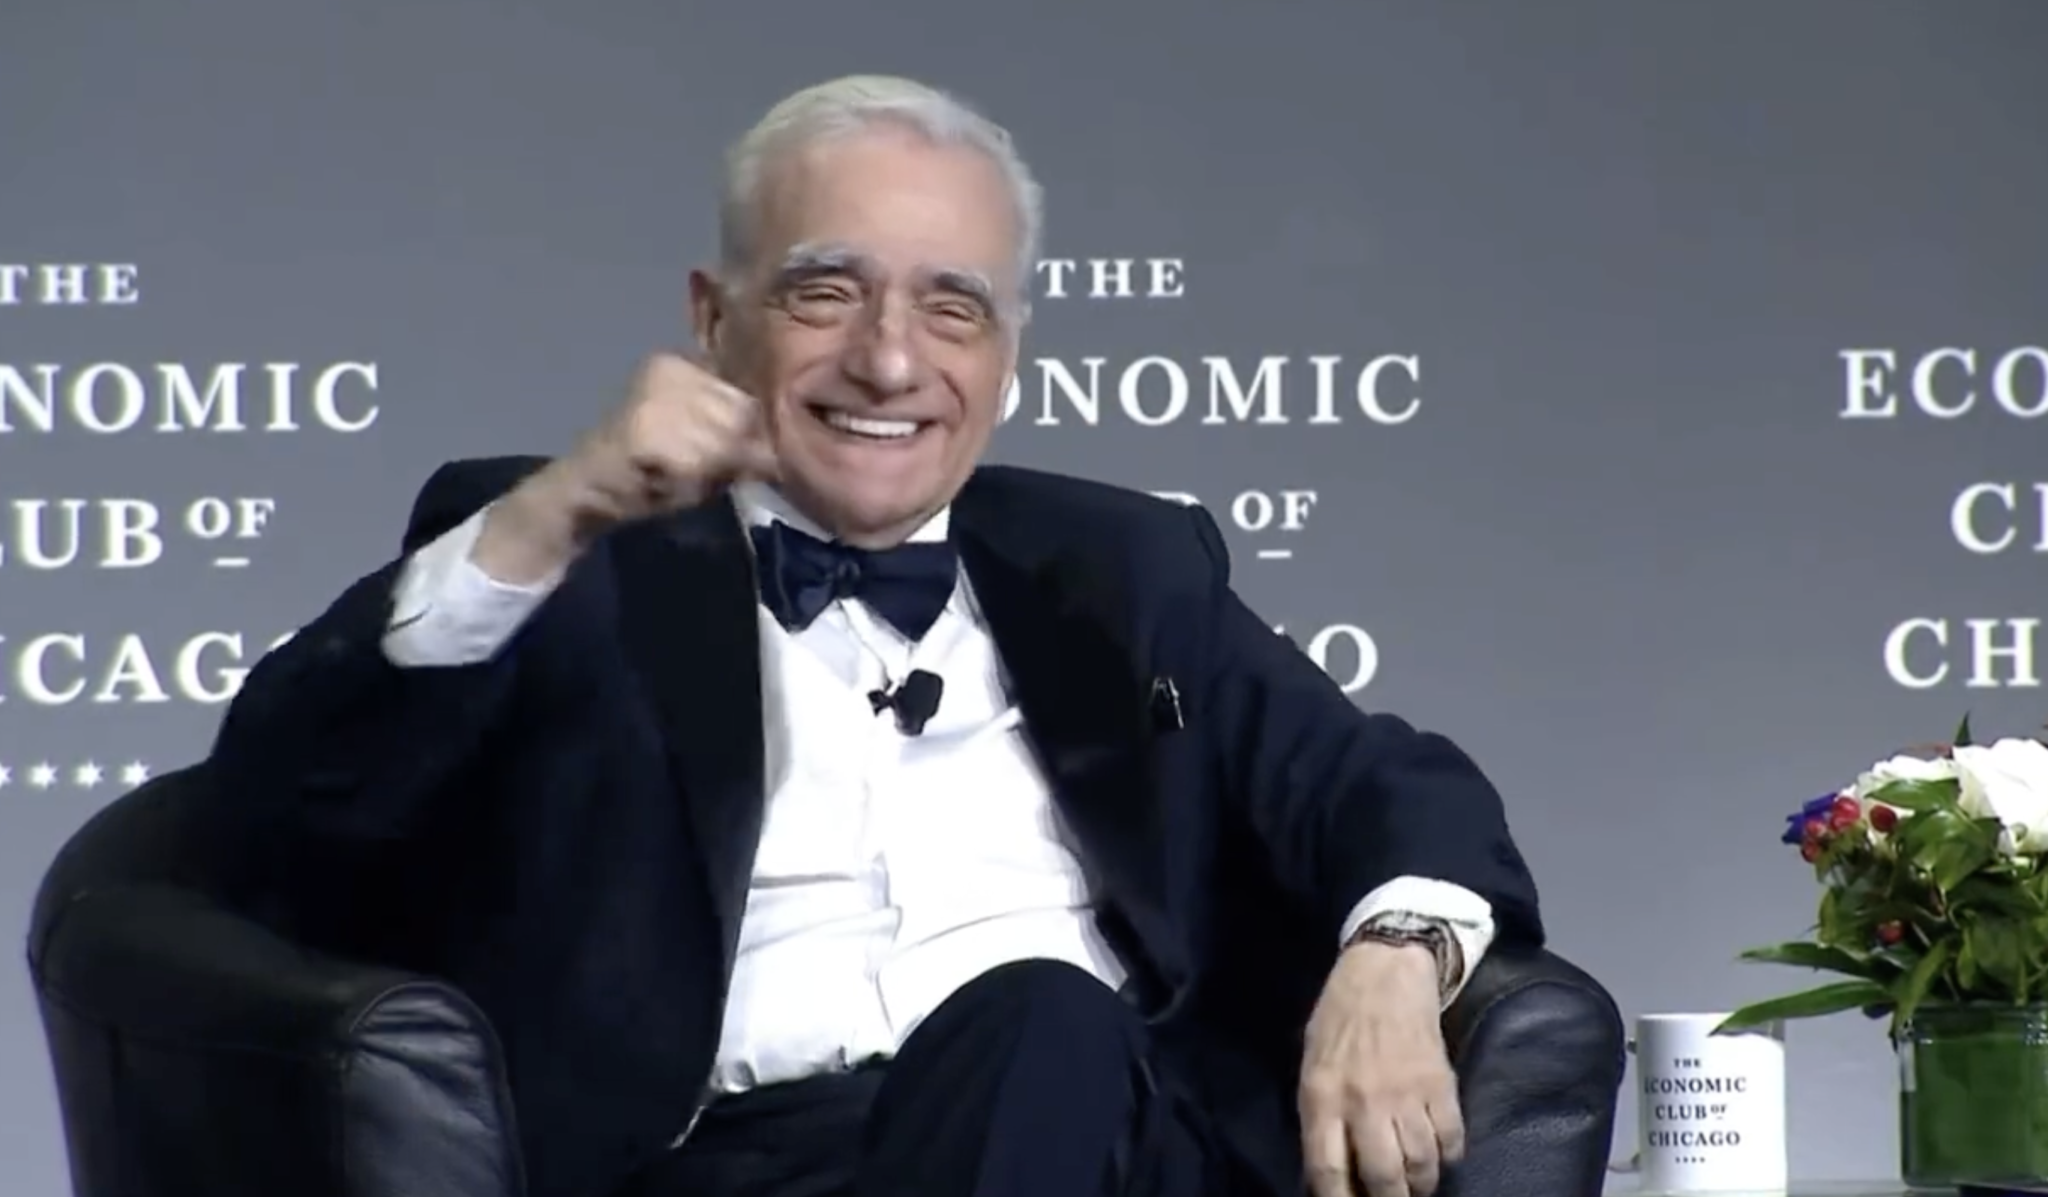 martin scorsese smiling and punching the air during an interview